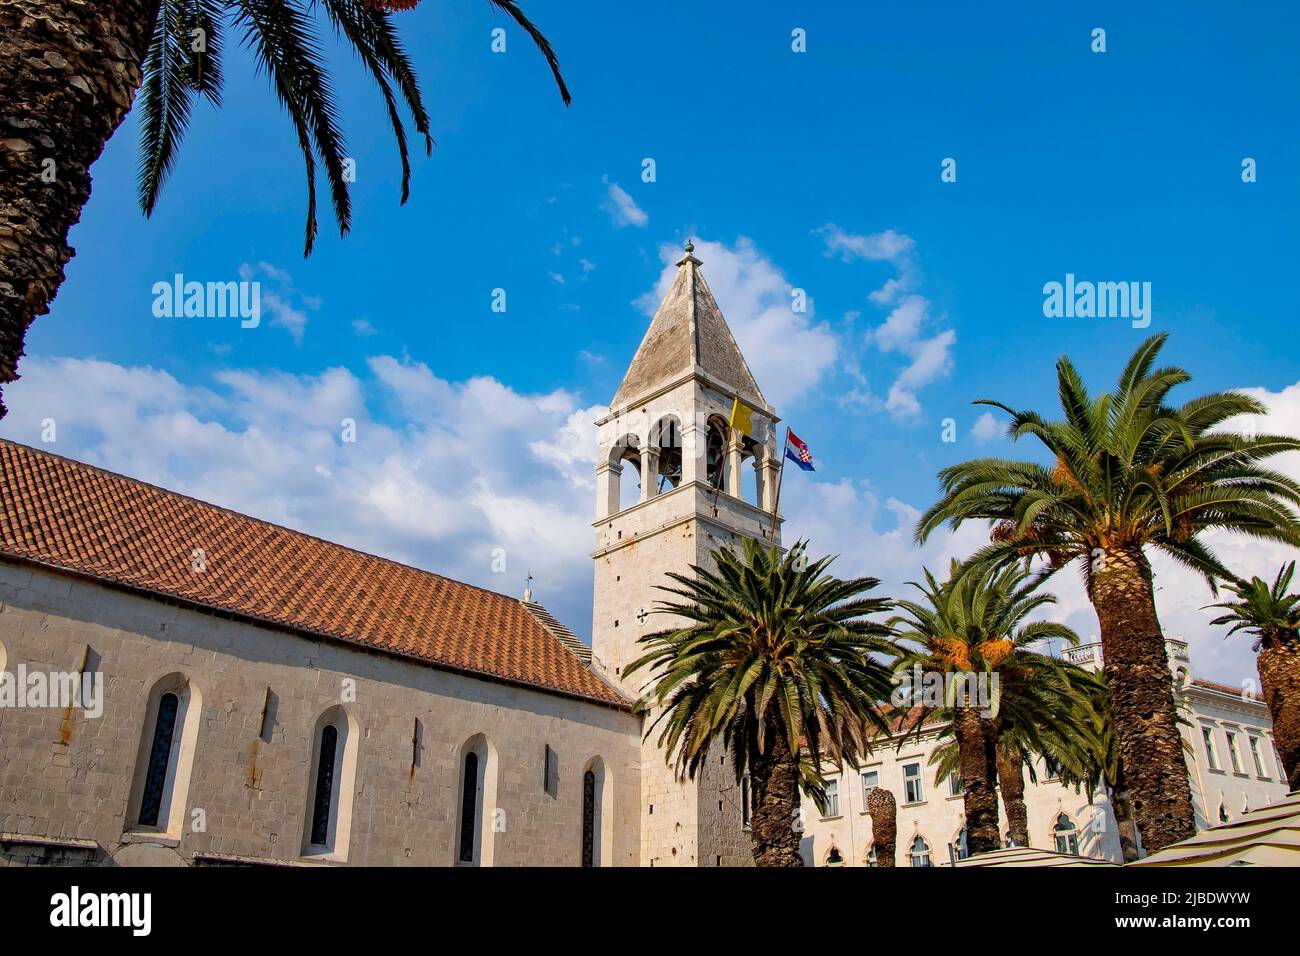 Close up view of town hall on sunny promenade along the pier of old Venetian town, Trogir, Croatia. Stock Photo